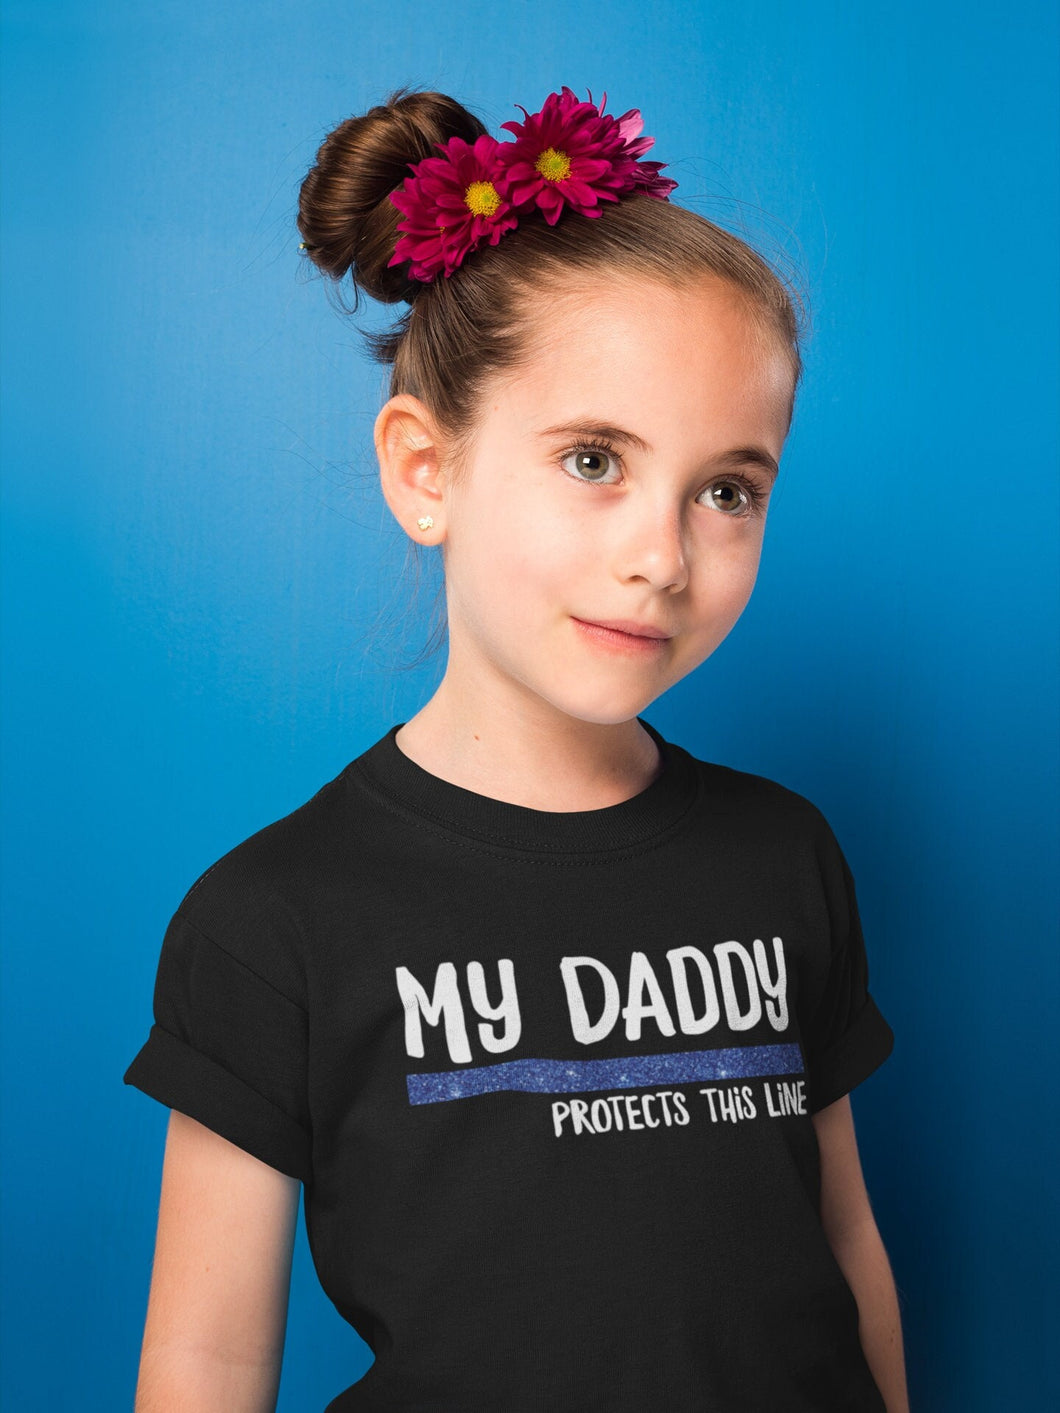 My Daddy Protects This Line Shirt, Thin Blue Line Shirt, Police Kid Shirt, Deputy Kid Shirt